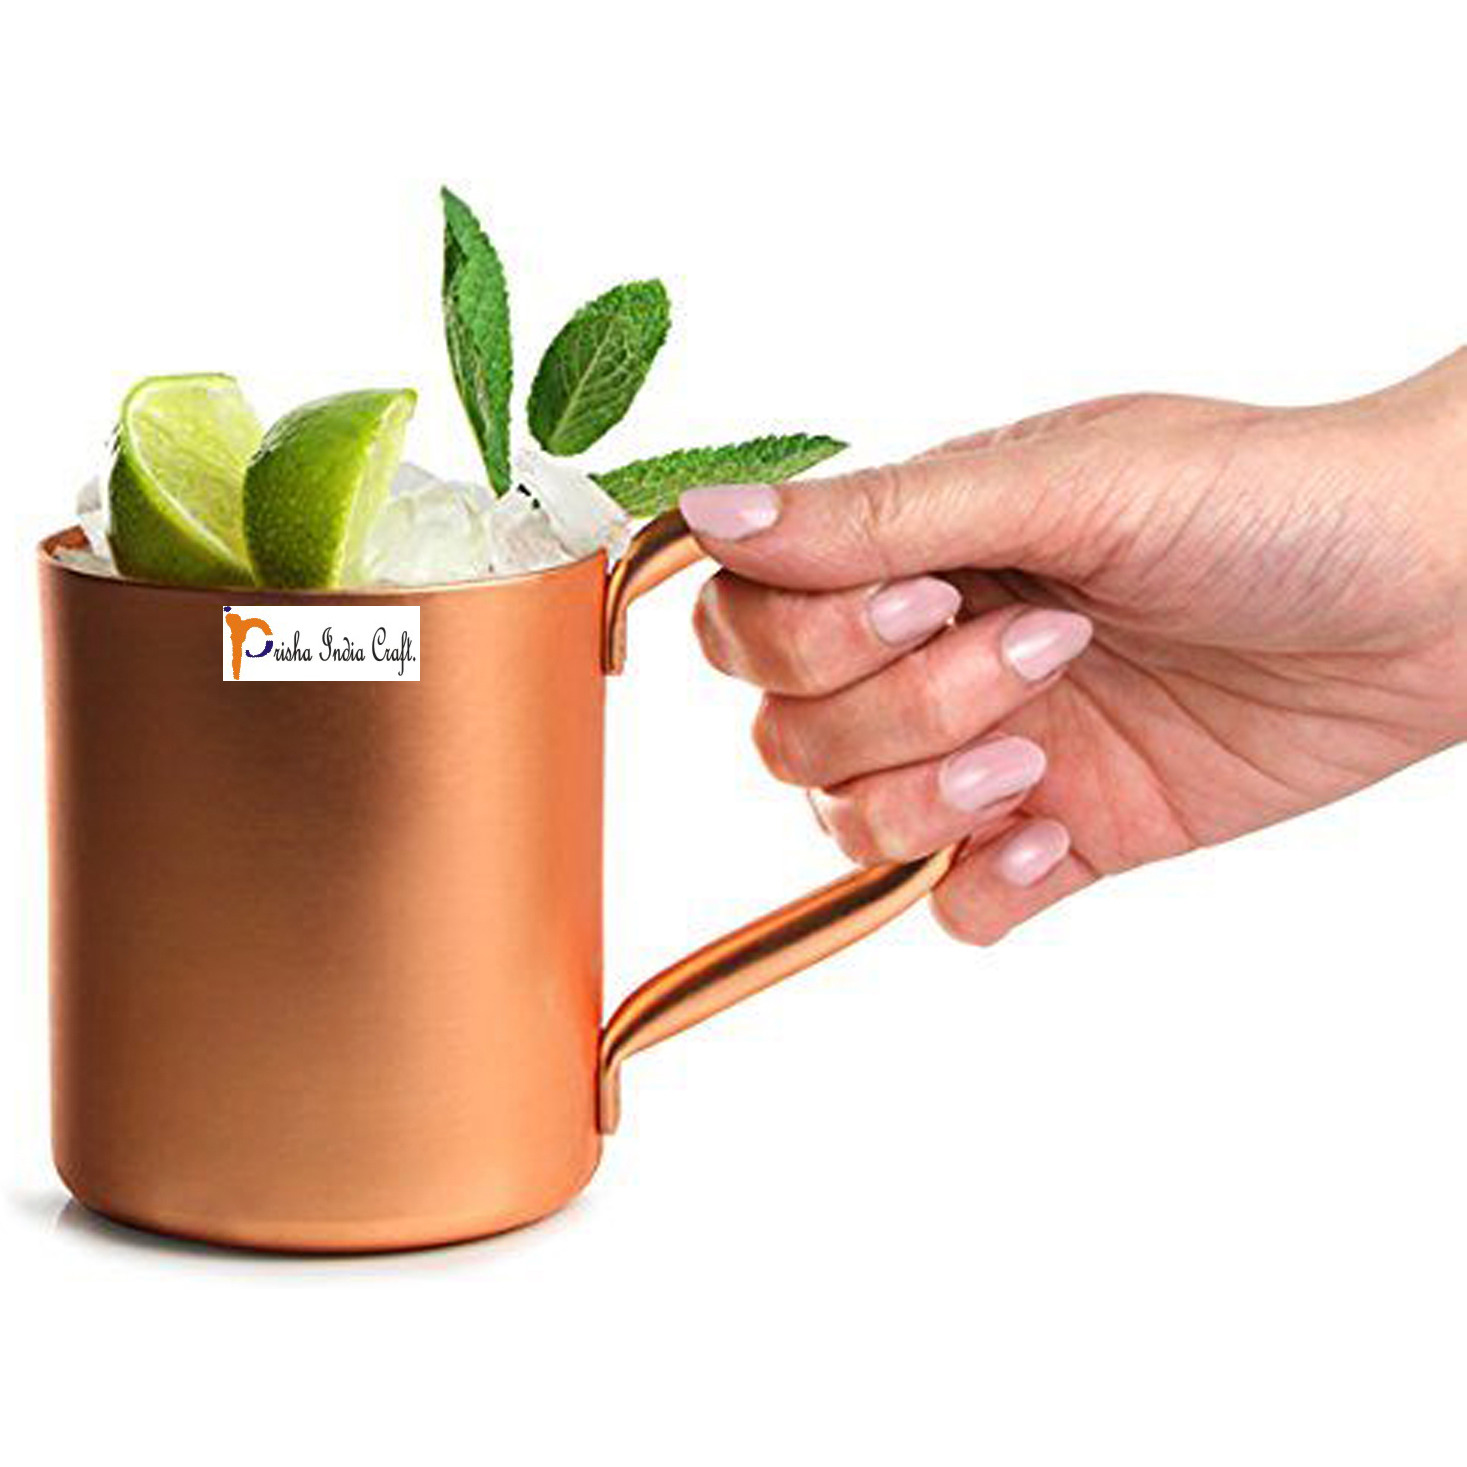 Set of 4 - Prisha India Craft B. Copper Mug for Moscow Mules 450 ML / 15 oz - 100% pure copper - Lacquered Finish - Solid Copper Best Quality Moscow Mule Mug, Moscow Mule Cocktail Cup, Copper Mugs, Cocktail Mugs